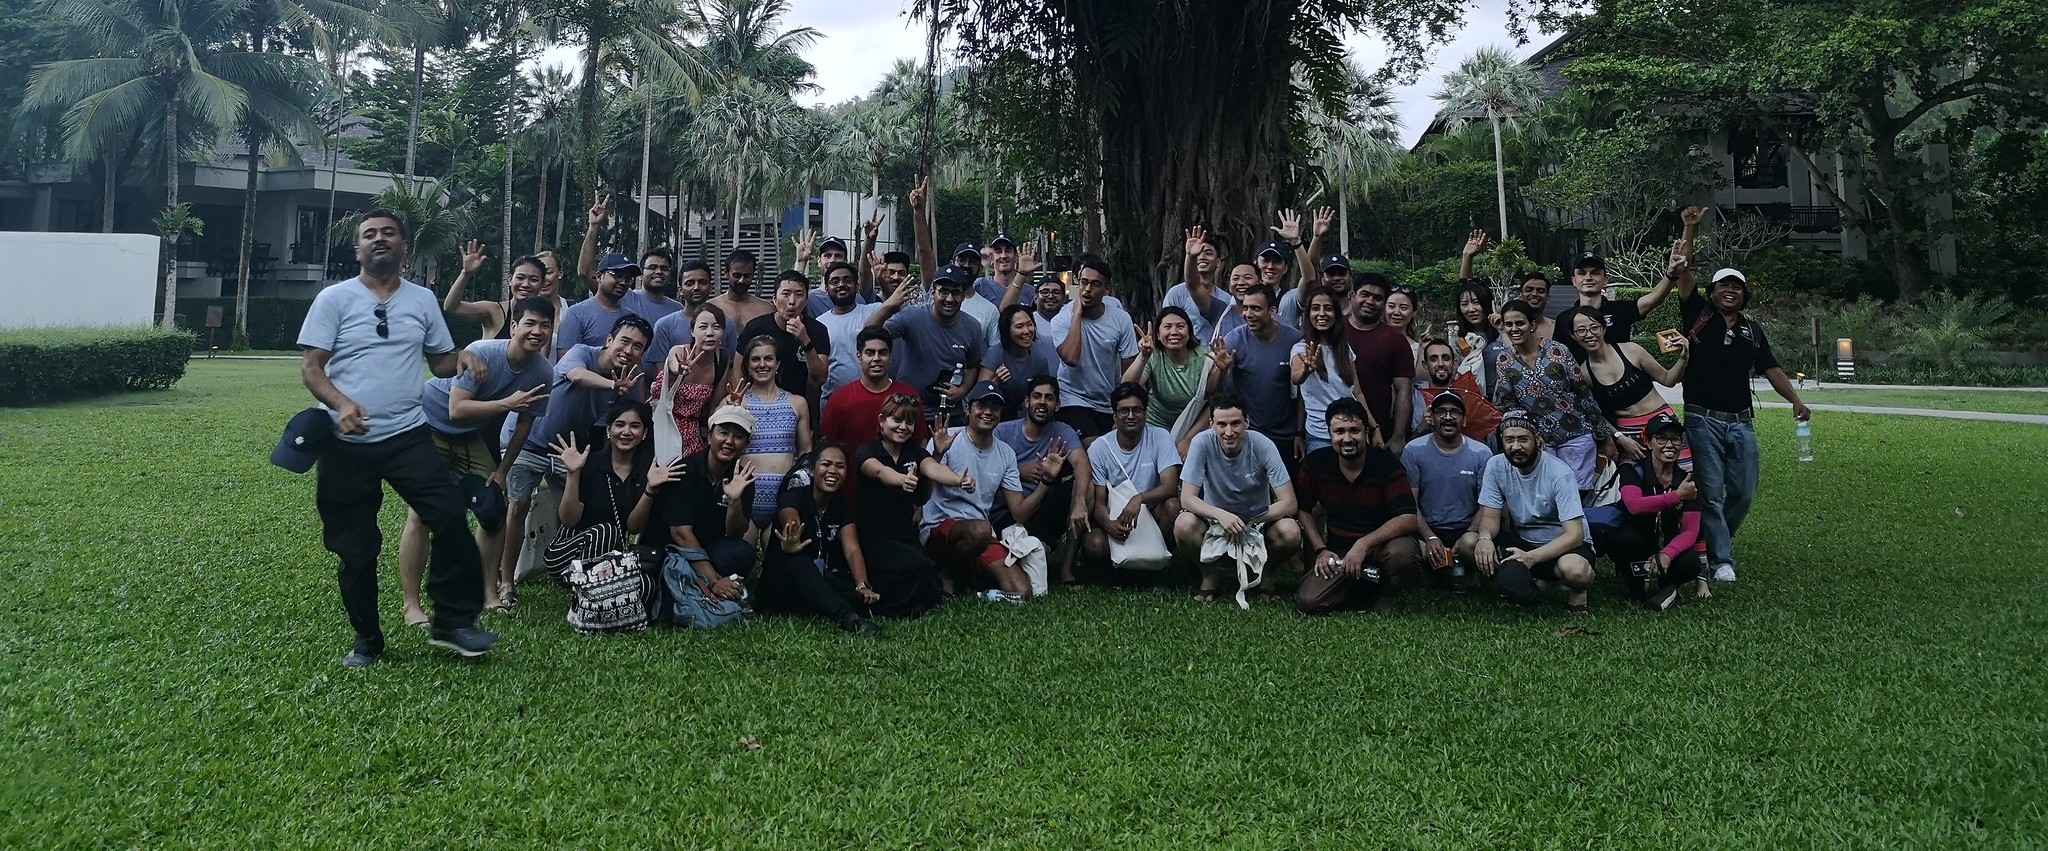 The Amazing Race event for Google in Phuket provided an unparalleled team-building experience set against the beautiful and culturally rich backdrop of Phuket